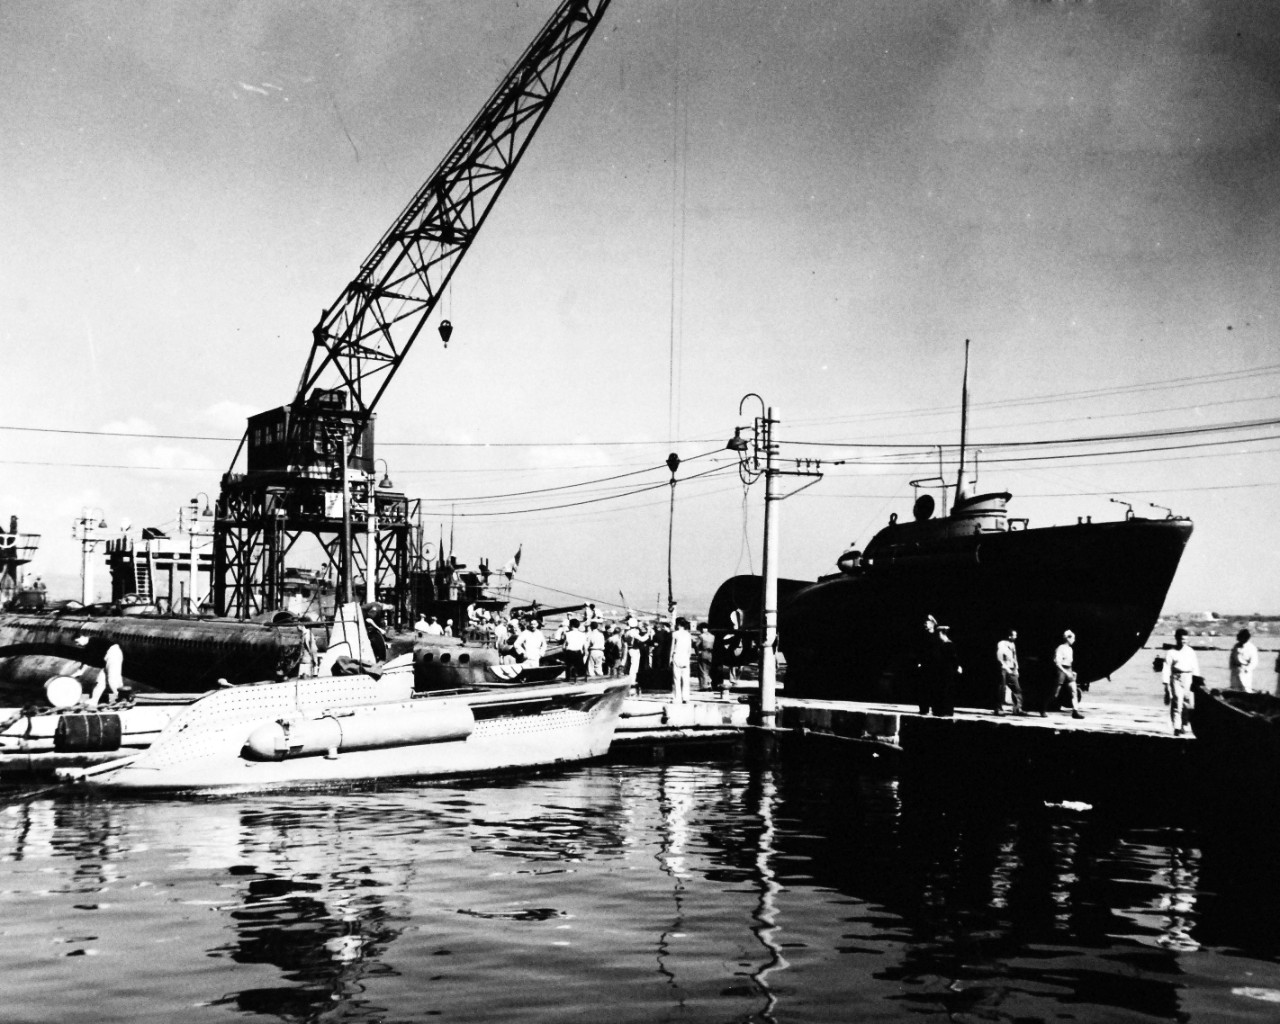 80-G-43772:  Italian CB Midget Submarine.  Italian warships surrendered at Taranto, Italy.  Side view of an Italian CB midget submarine, showing torpedo tube fixed to the side.  Photograph released November 17, 1943.  Official U.S. Navy Photograph, now in the collections of the National Archives.   (2015/10/13).